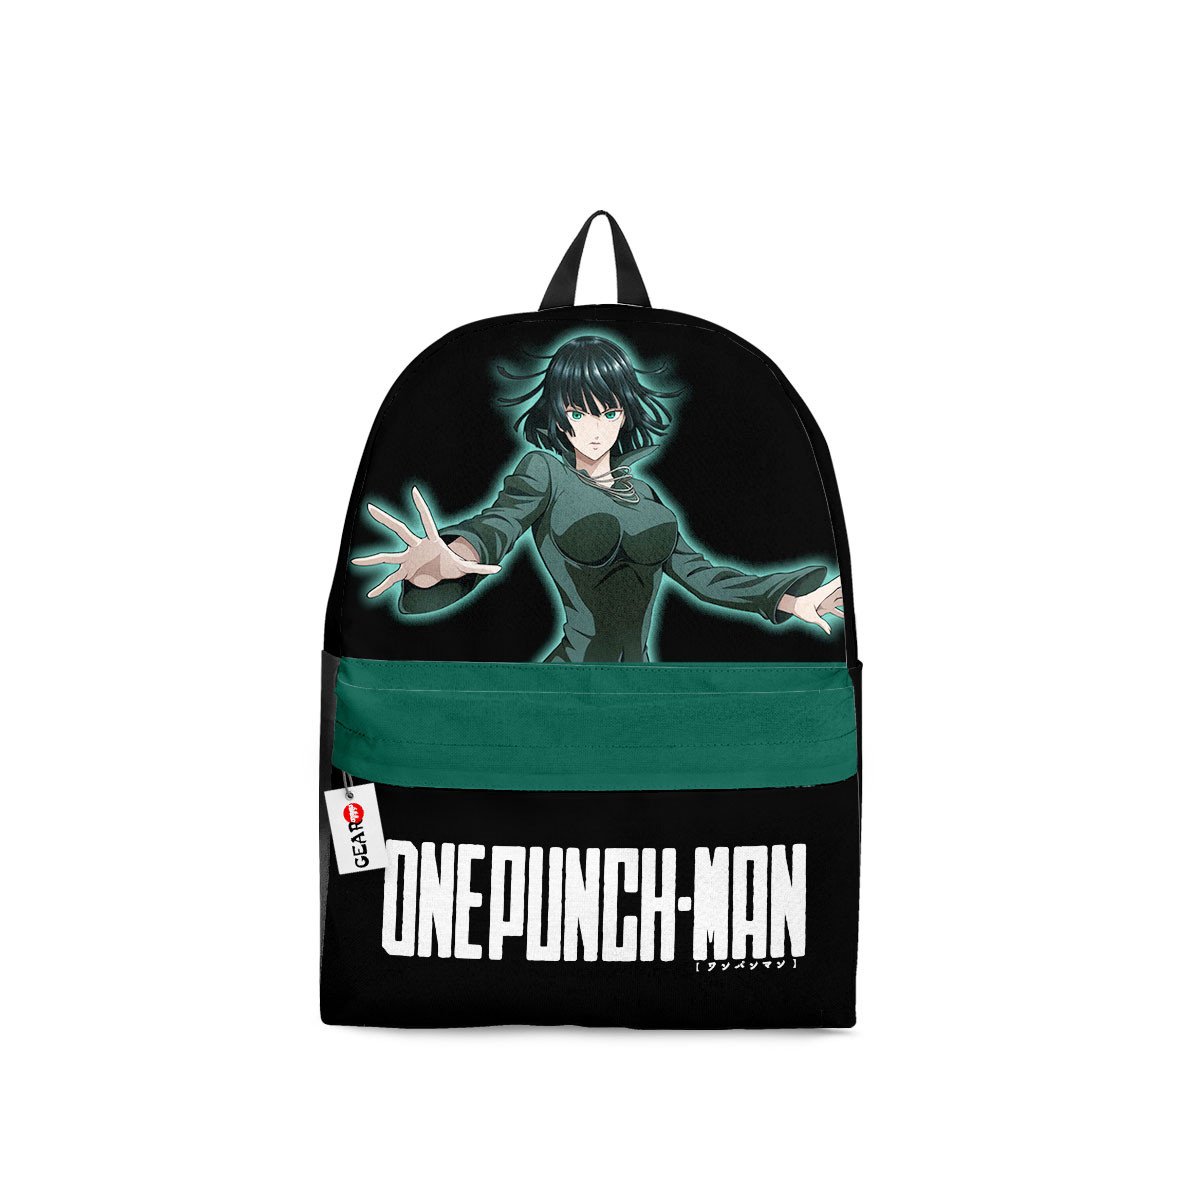 BEST Fubuki Anime One Punch Man Printed 3D Leisure Backpack